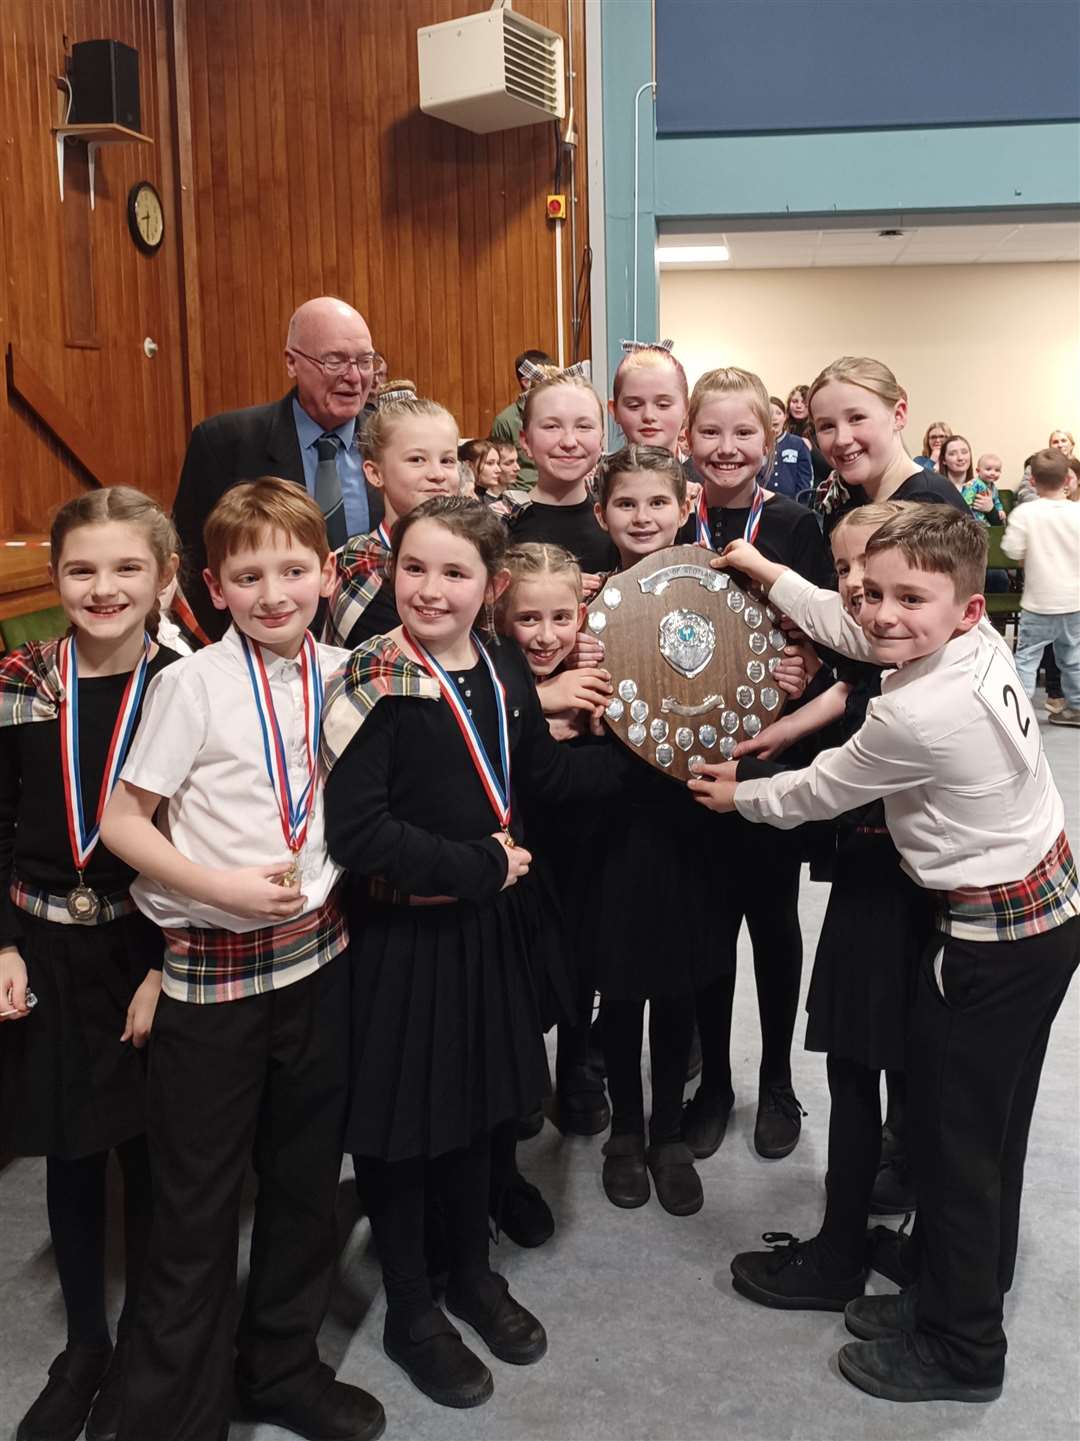 Brora Primary School were the overall winners and were presented with a handsome trophy by Councillor Jim McGillivray.